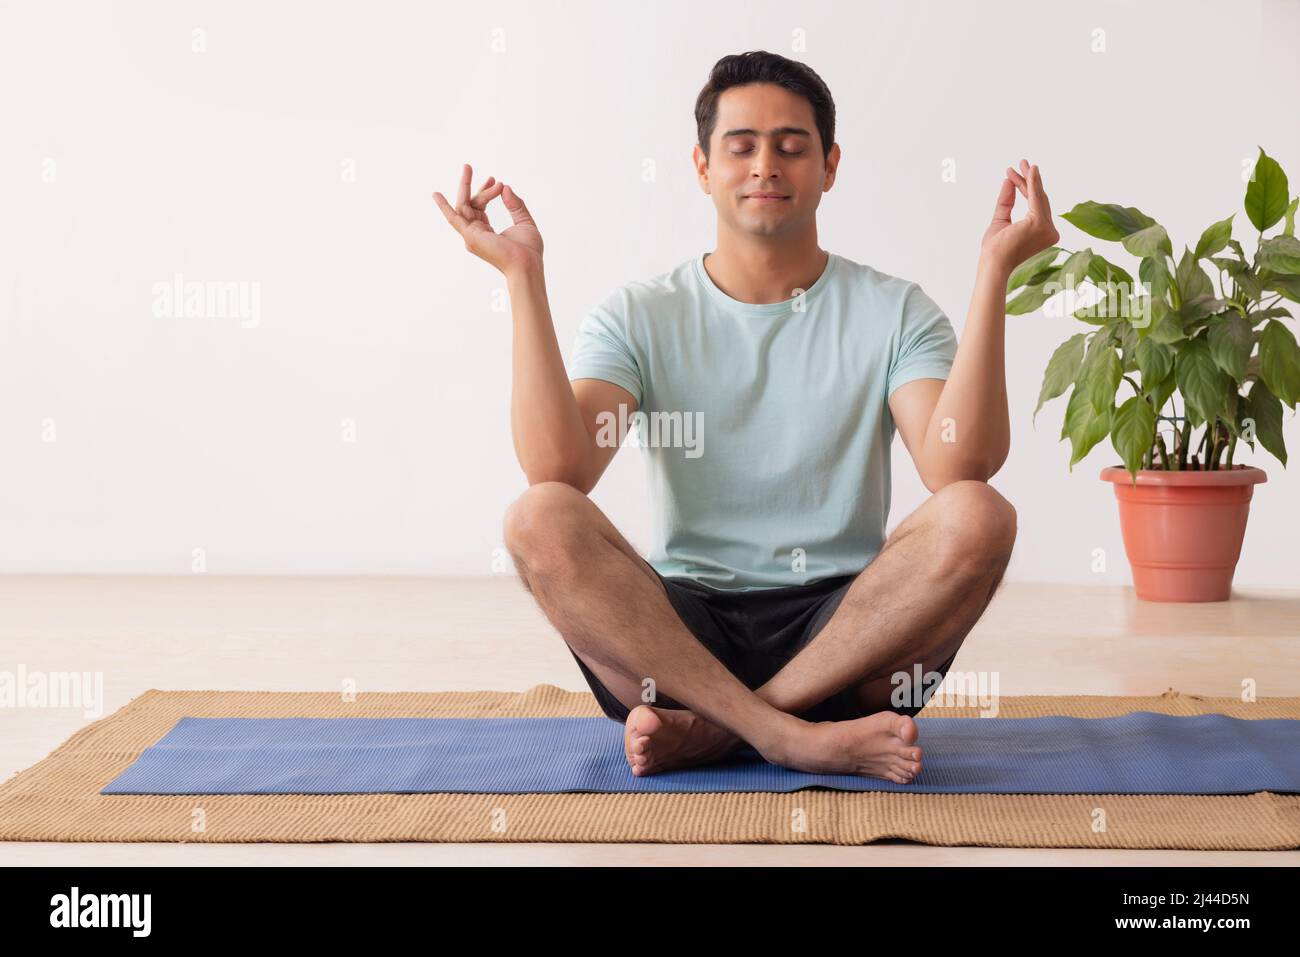 Portrait of a young man meditating at home Stock Photo